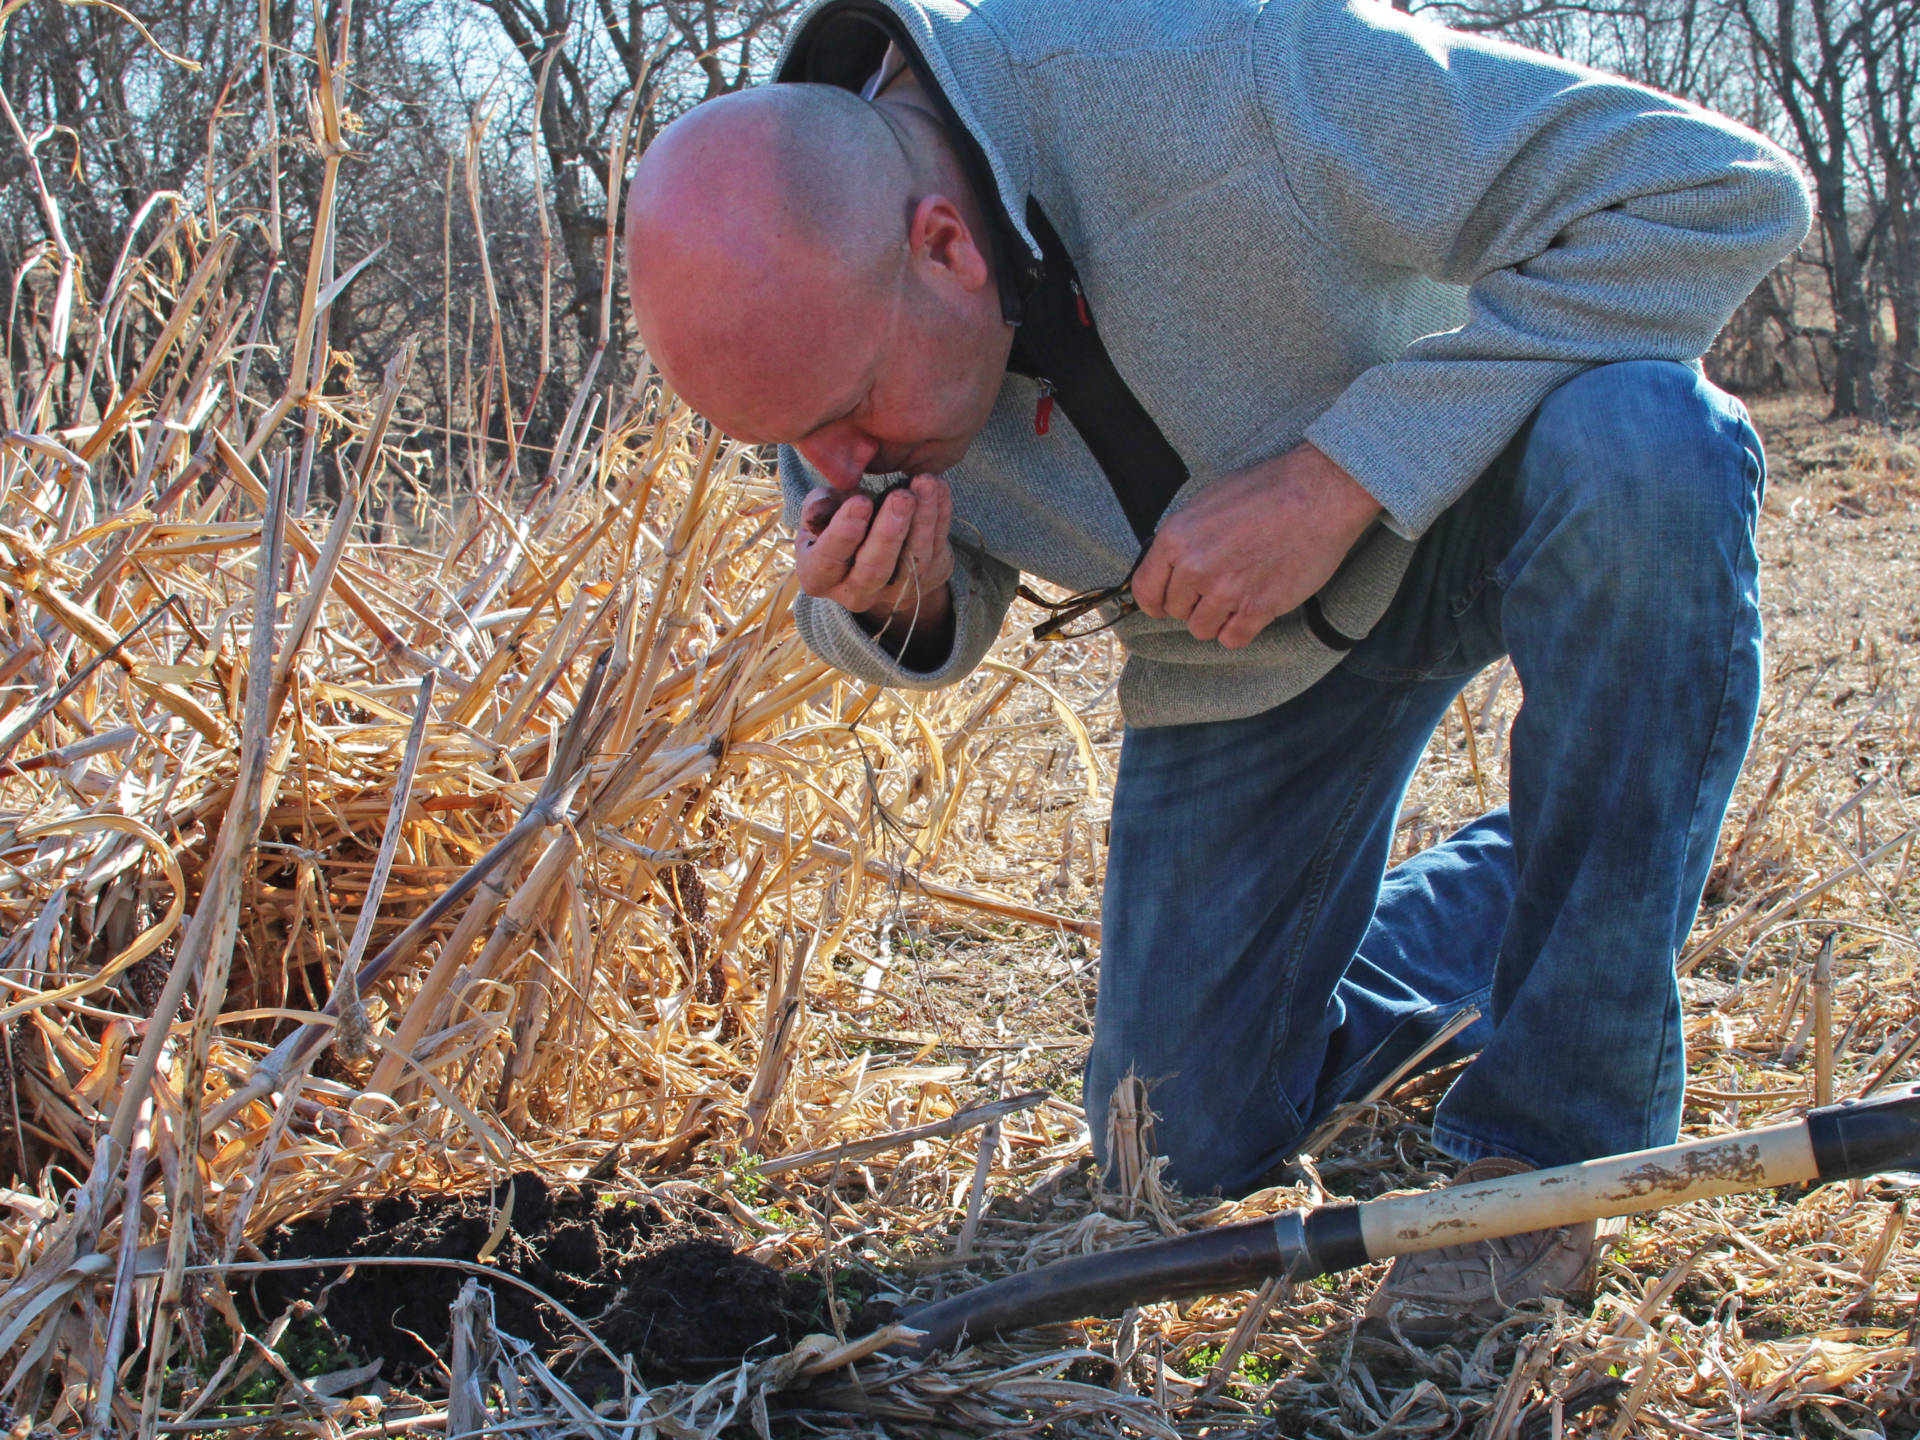 For Del Ficke, improving the soil is a spiritual quest.